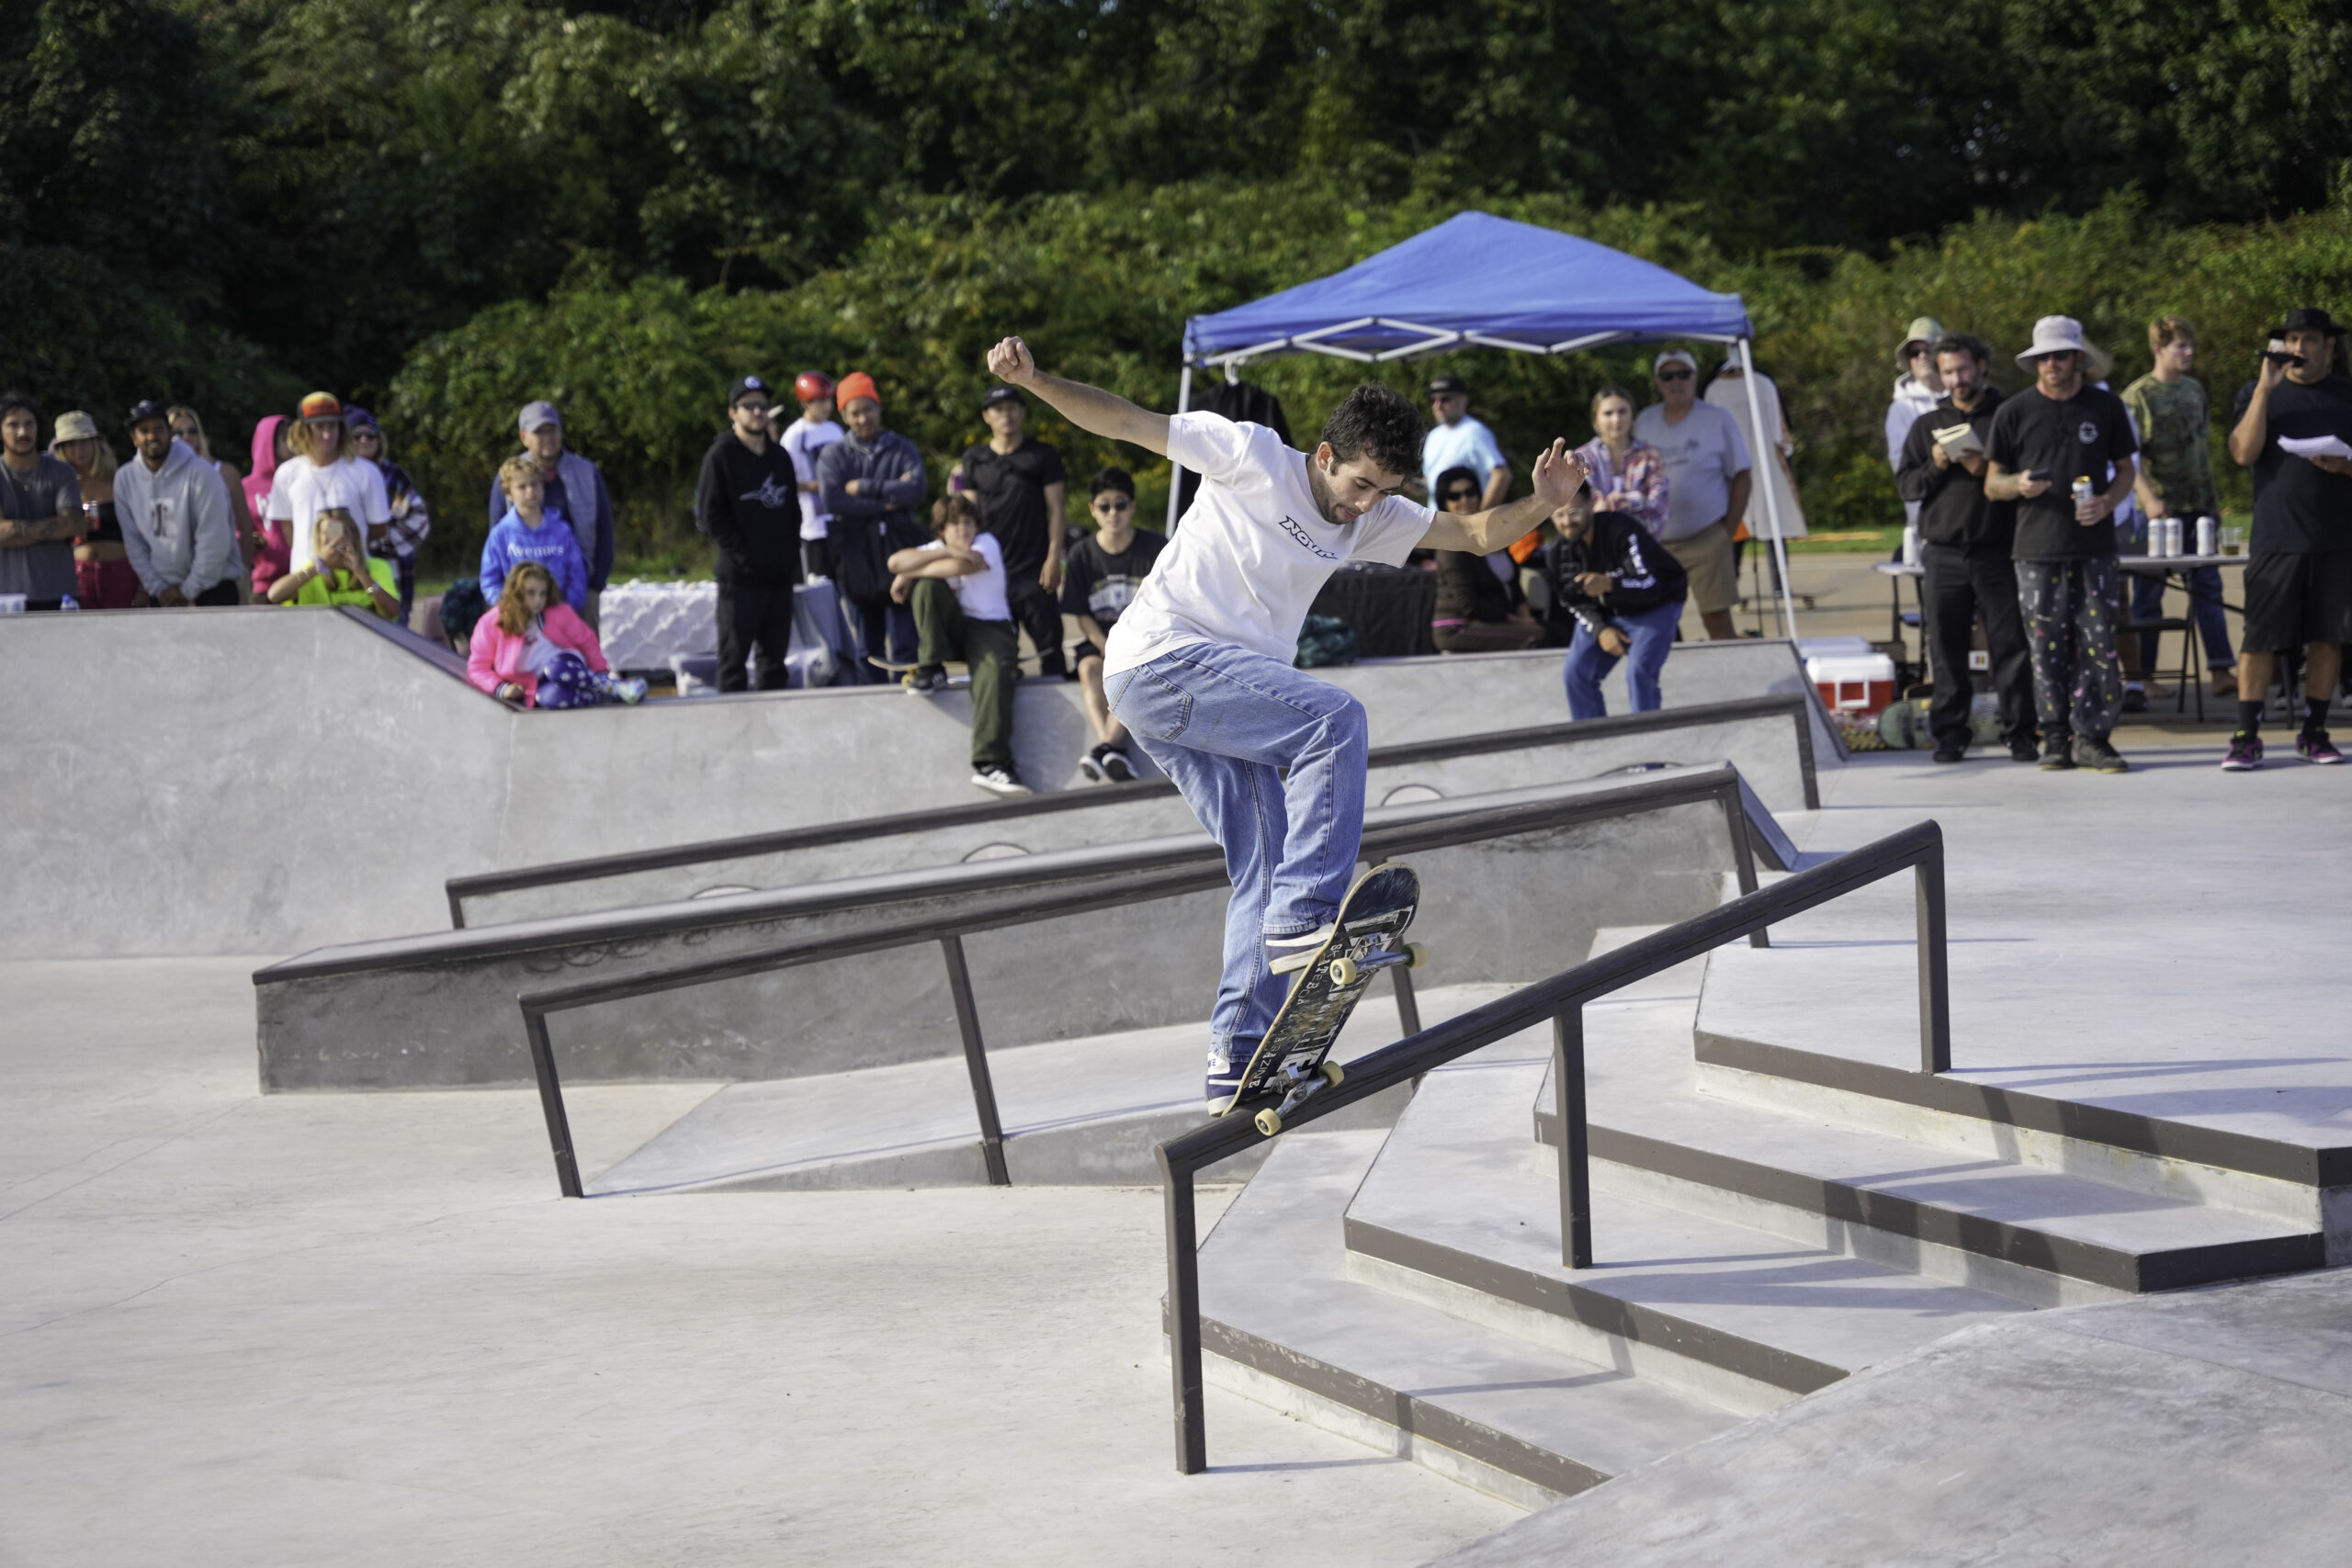 Pierson graduate Pat Chisholm won the 13 and over street course title at the Andy Kessler Day Memorial Tournament at the Lars Simonsen Montauk Skate Park on Saturday afternoon. RON ESPOSITO PHOTOS